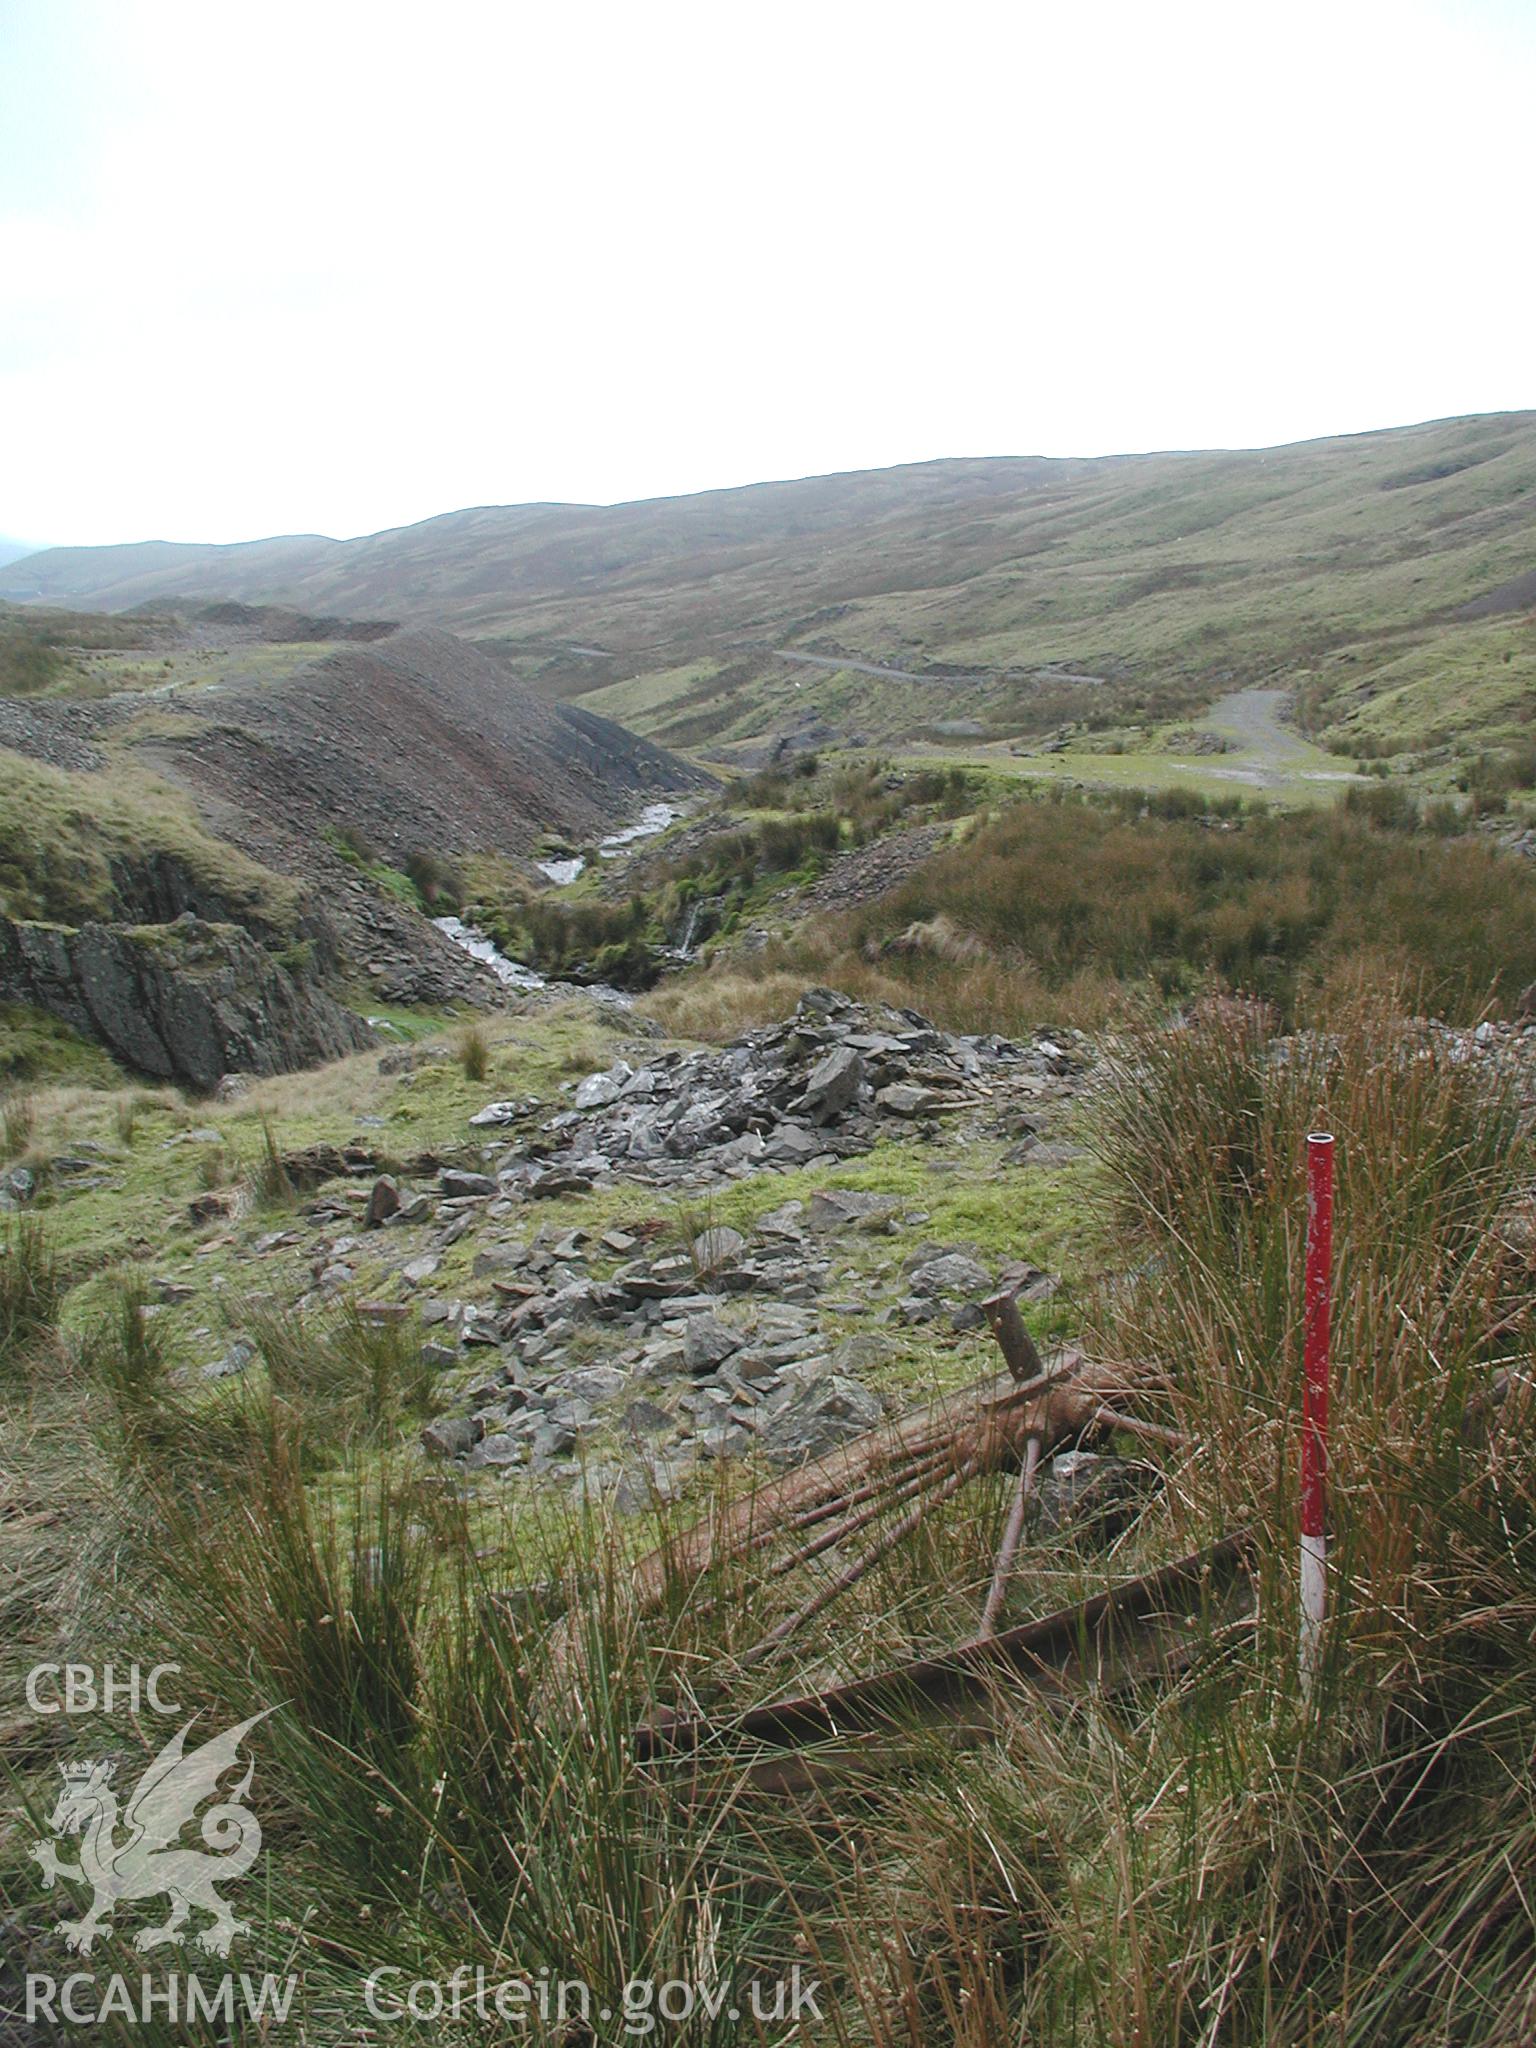 Photograph of Plynlimon Lead Mine taken on 02/11/2004 by R.S. Jones during an Upland Survey undertaken by Cambrian Archaeological Projects.